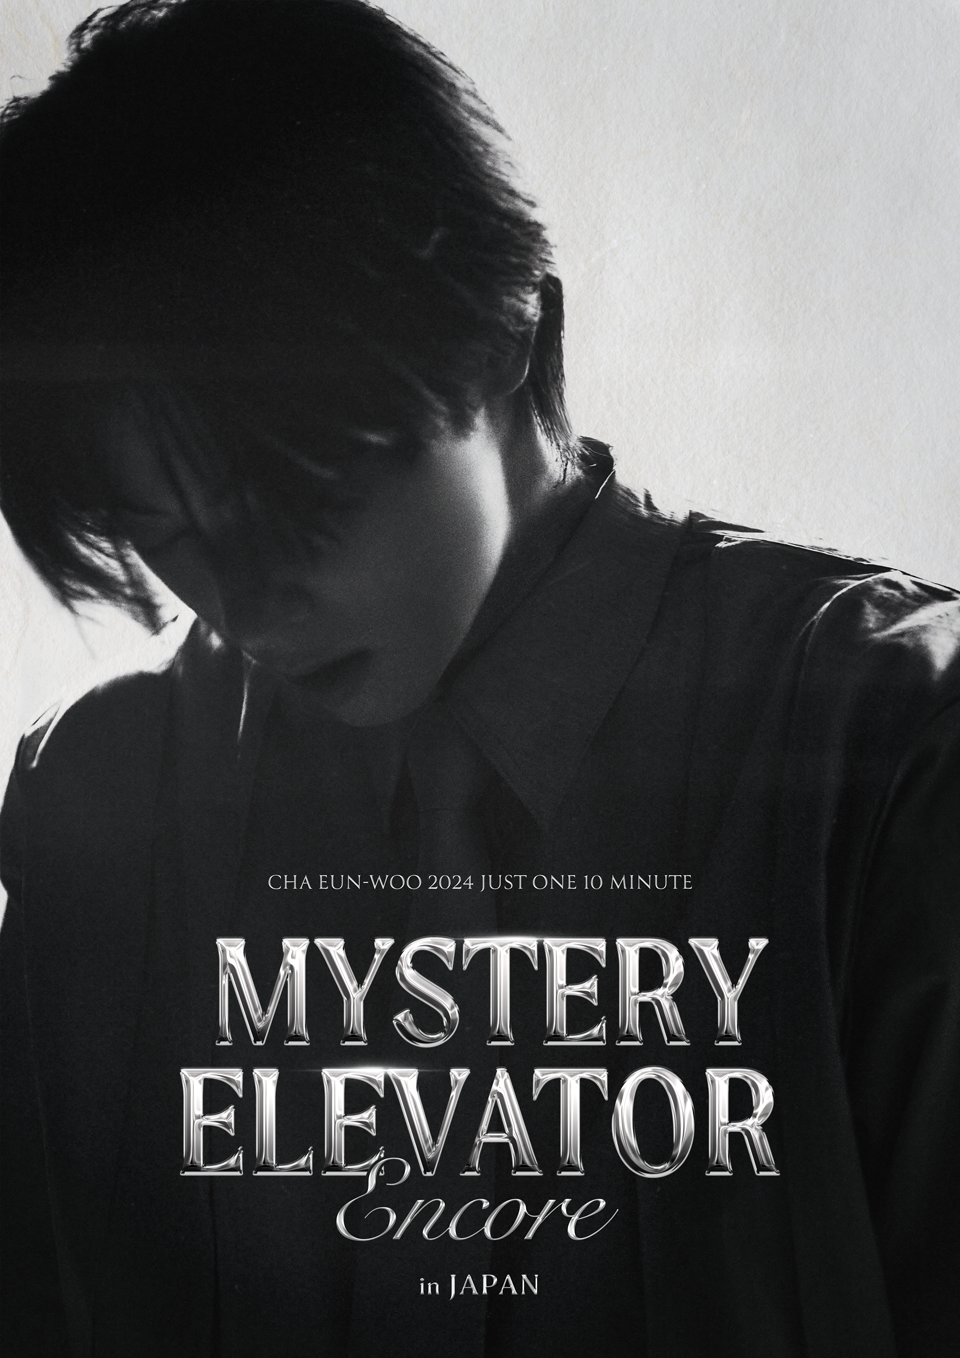 「CHA EUN-WOO 2024 Just One 10 Minute [Mystery Elevator] Encore in Japan」